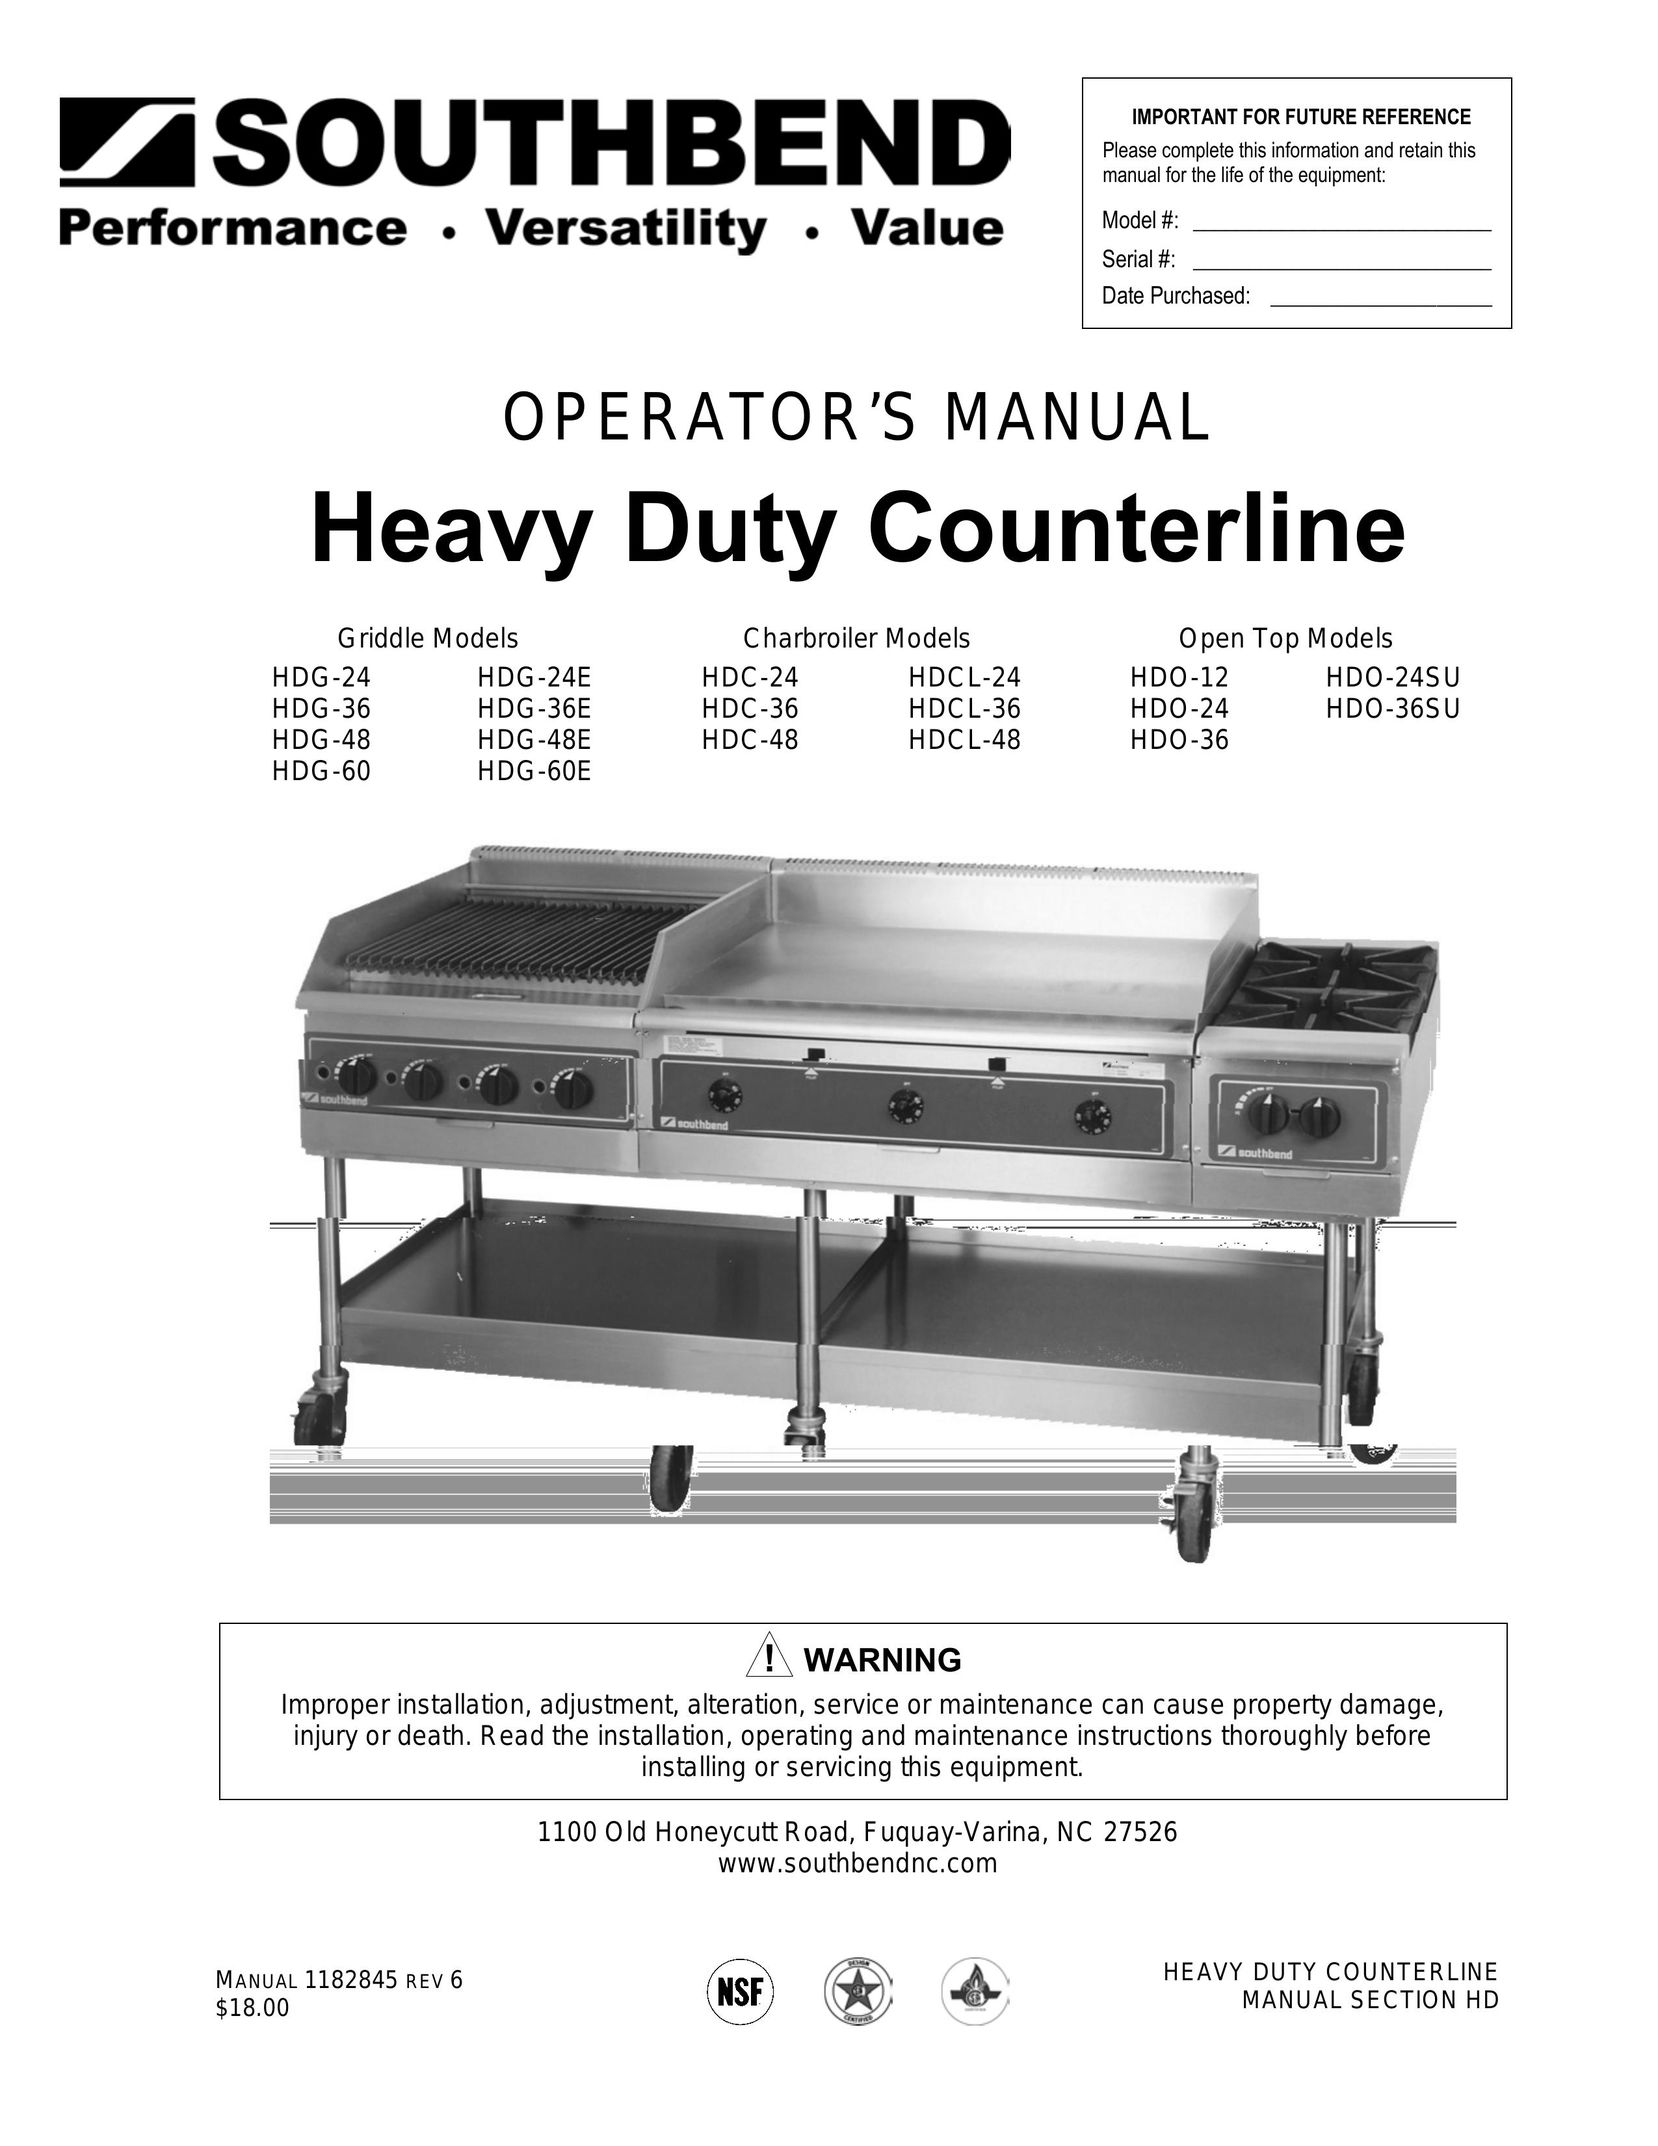 Southbend HDC-48 Cooktop User Manual